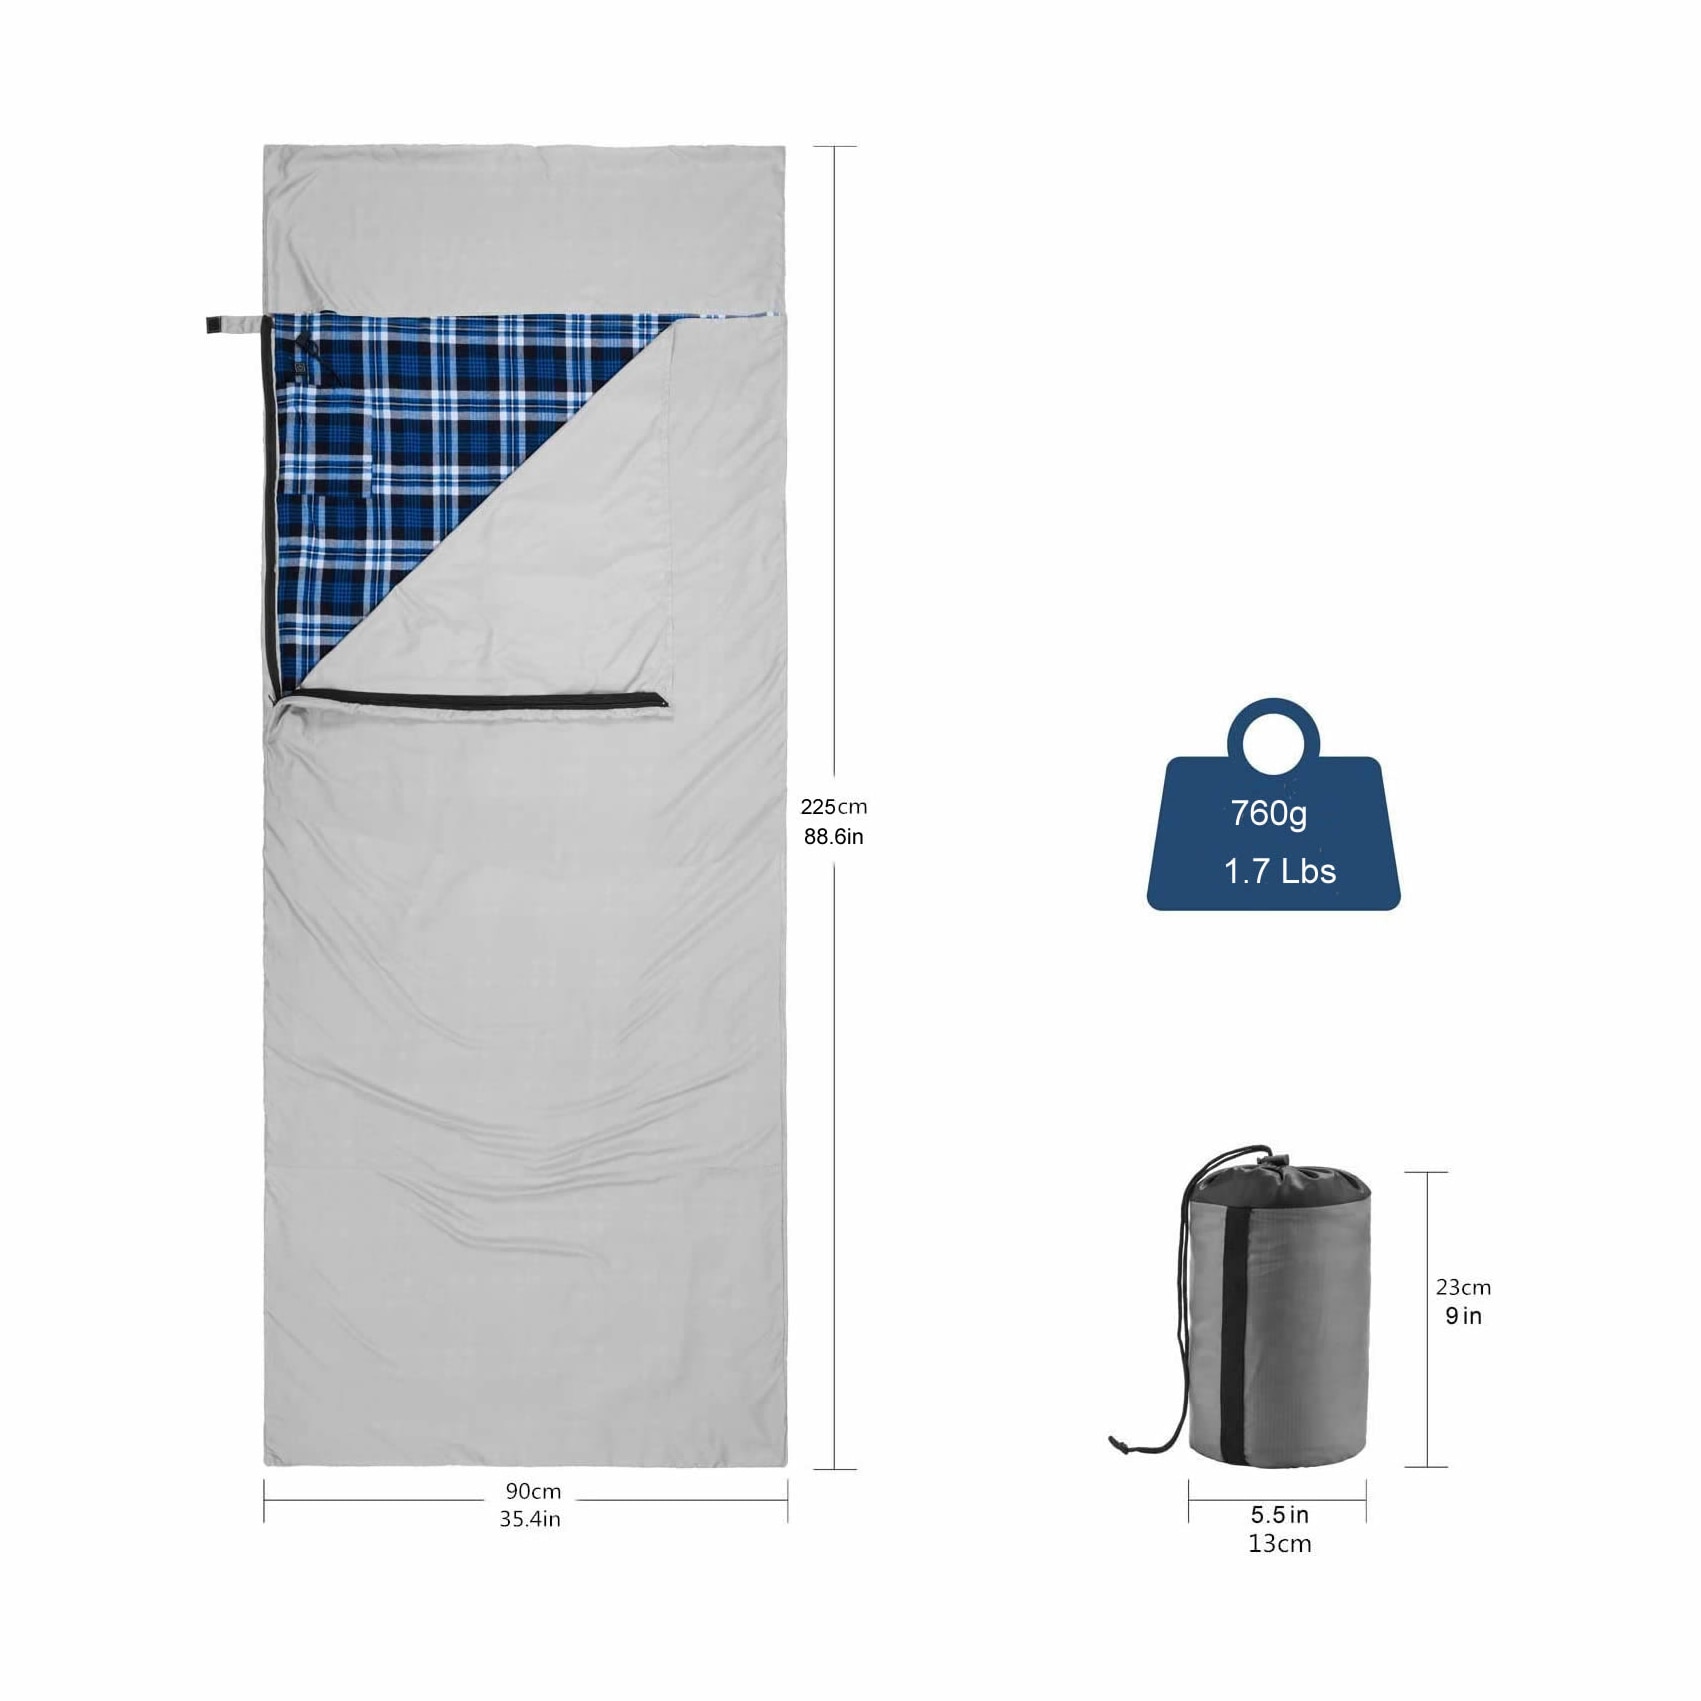 Flannel Heated Sleeping Bag Liner Thermolite Ultralight Camping Travel Winter Sleeping Bag Liner Cotton, Special Heating Plates